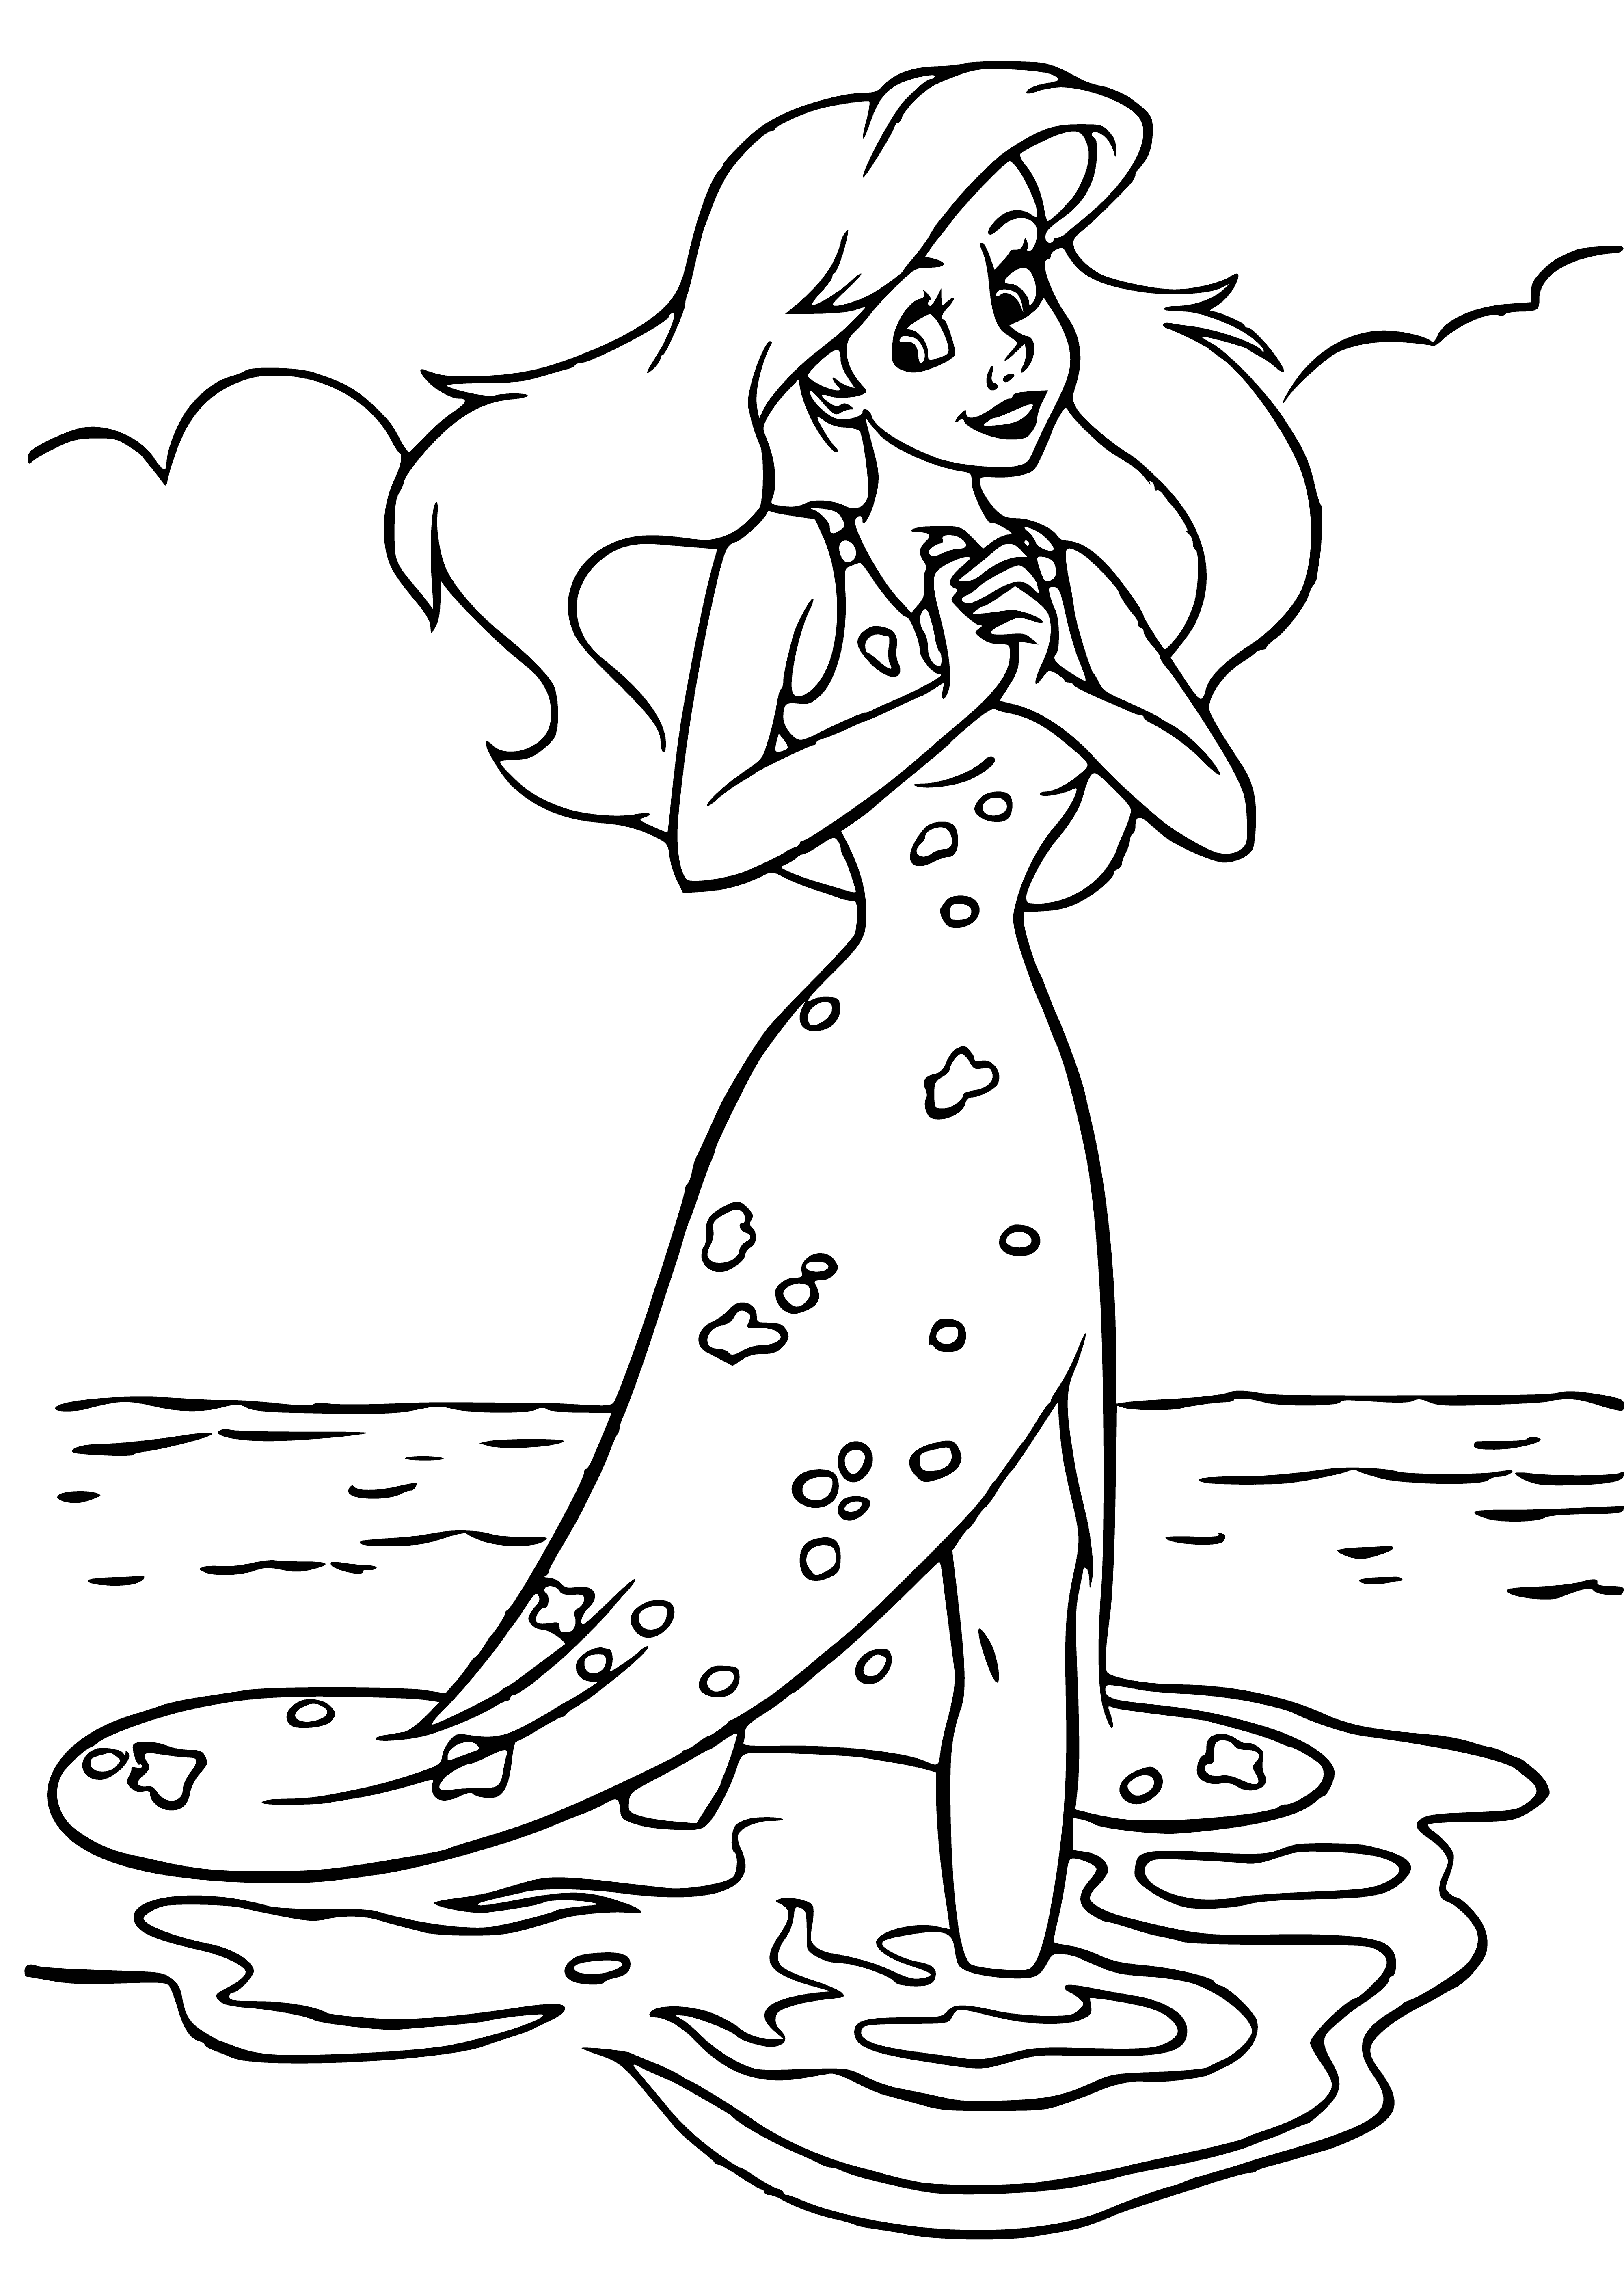 Legs, not a tail coloring page